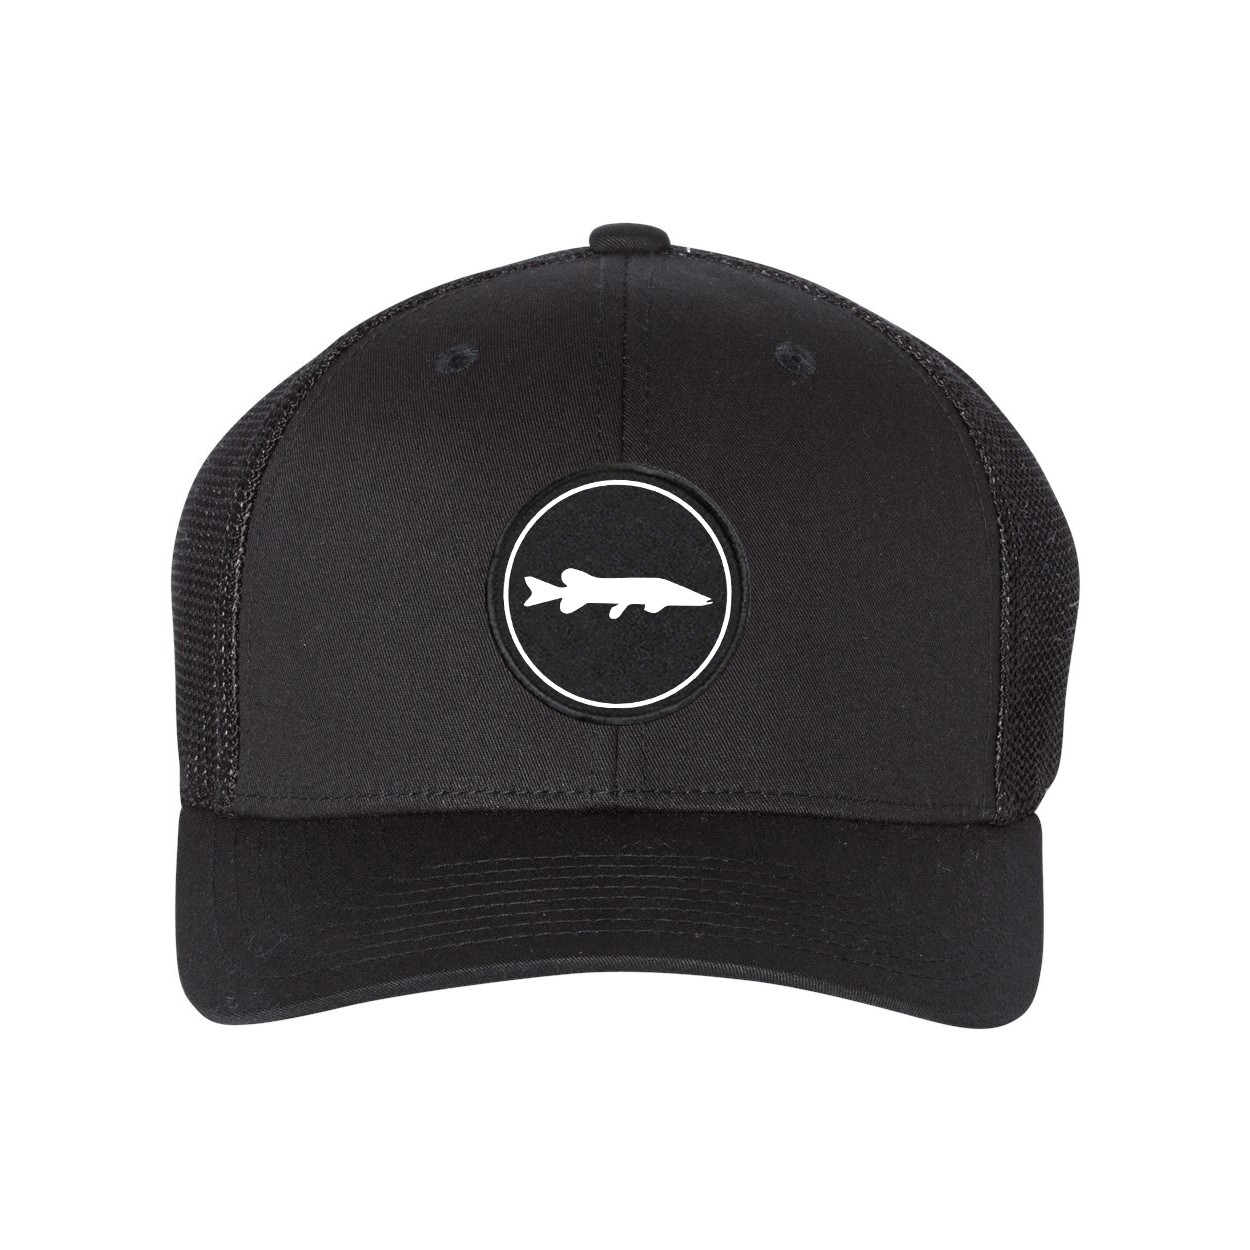 https://lifebrand.co/wp-content/blogs.dir/147/files/2022/04/fish-northern-pike-icon-logo-classic-woven-circle-patch-snapback-trucker-hat-black-white-logo-20220419224616.jpg